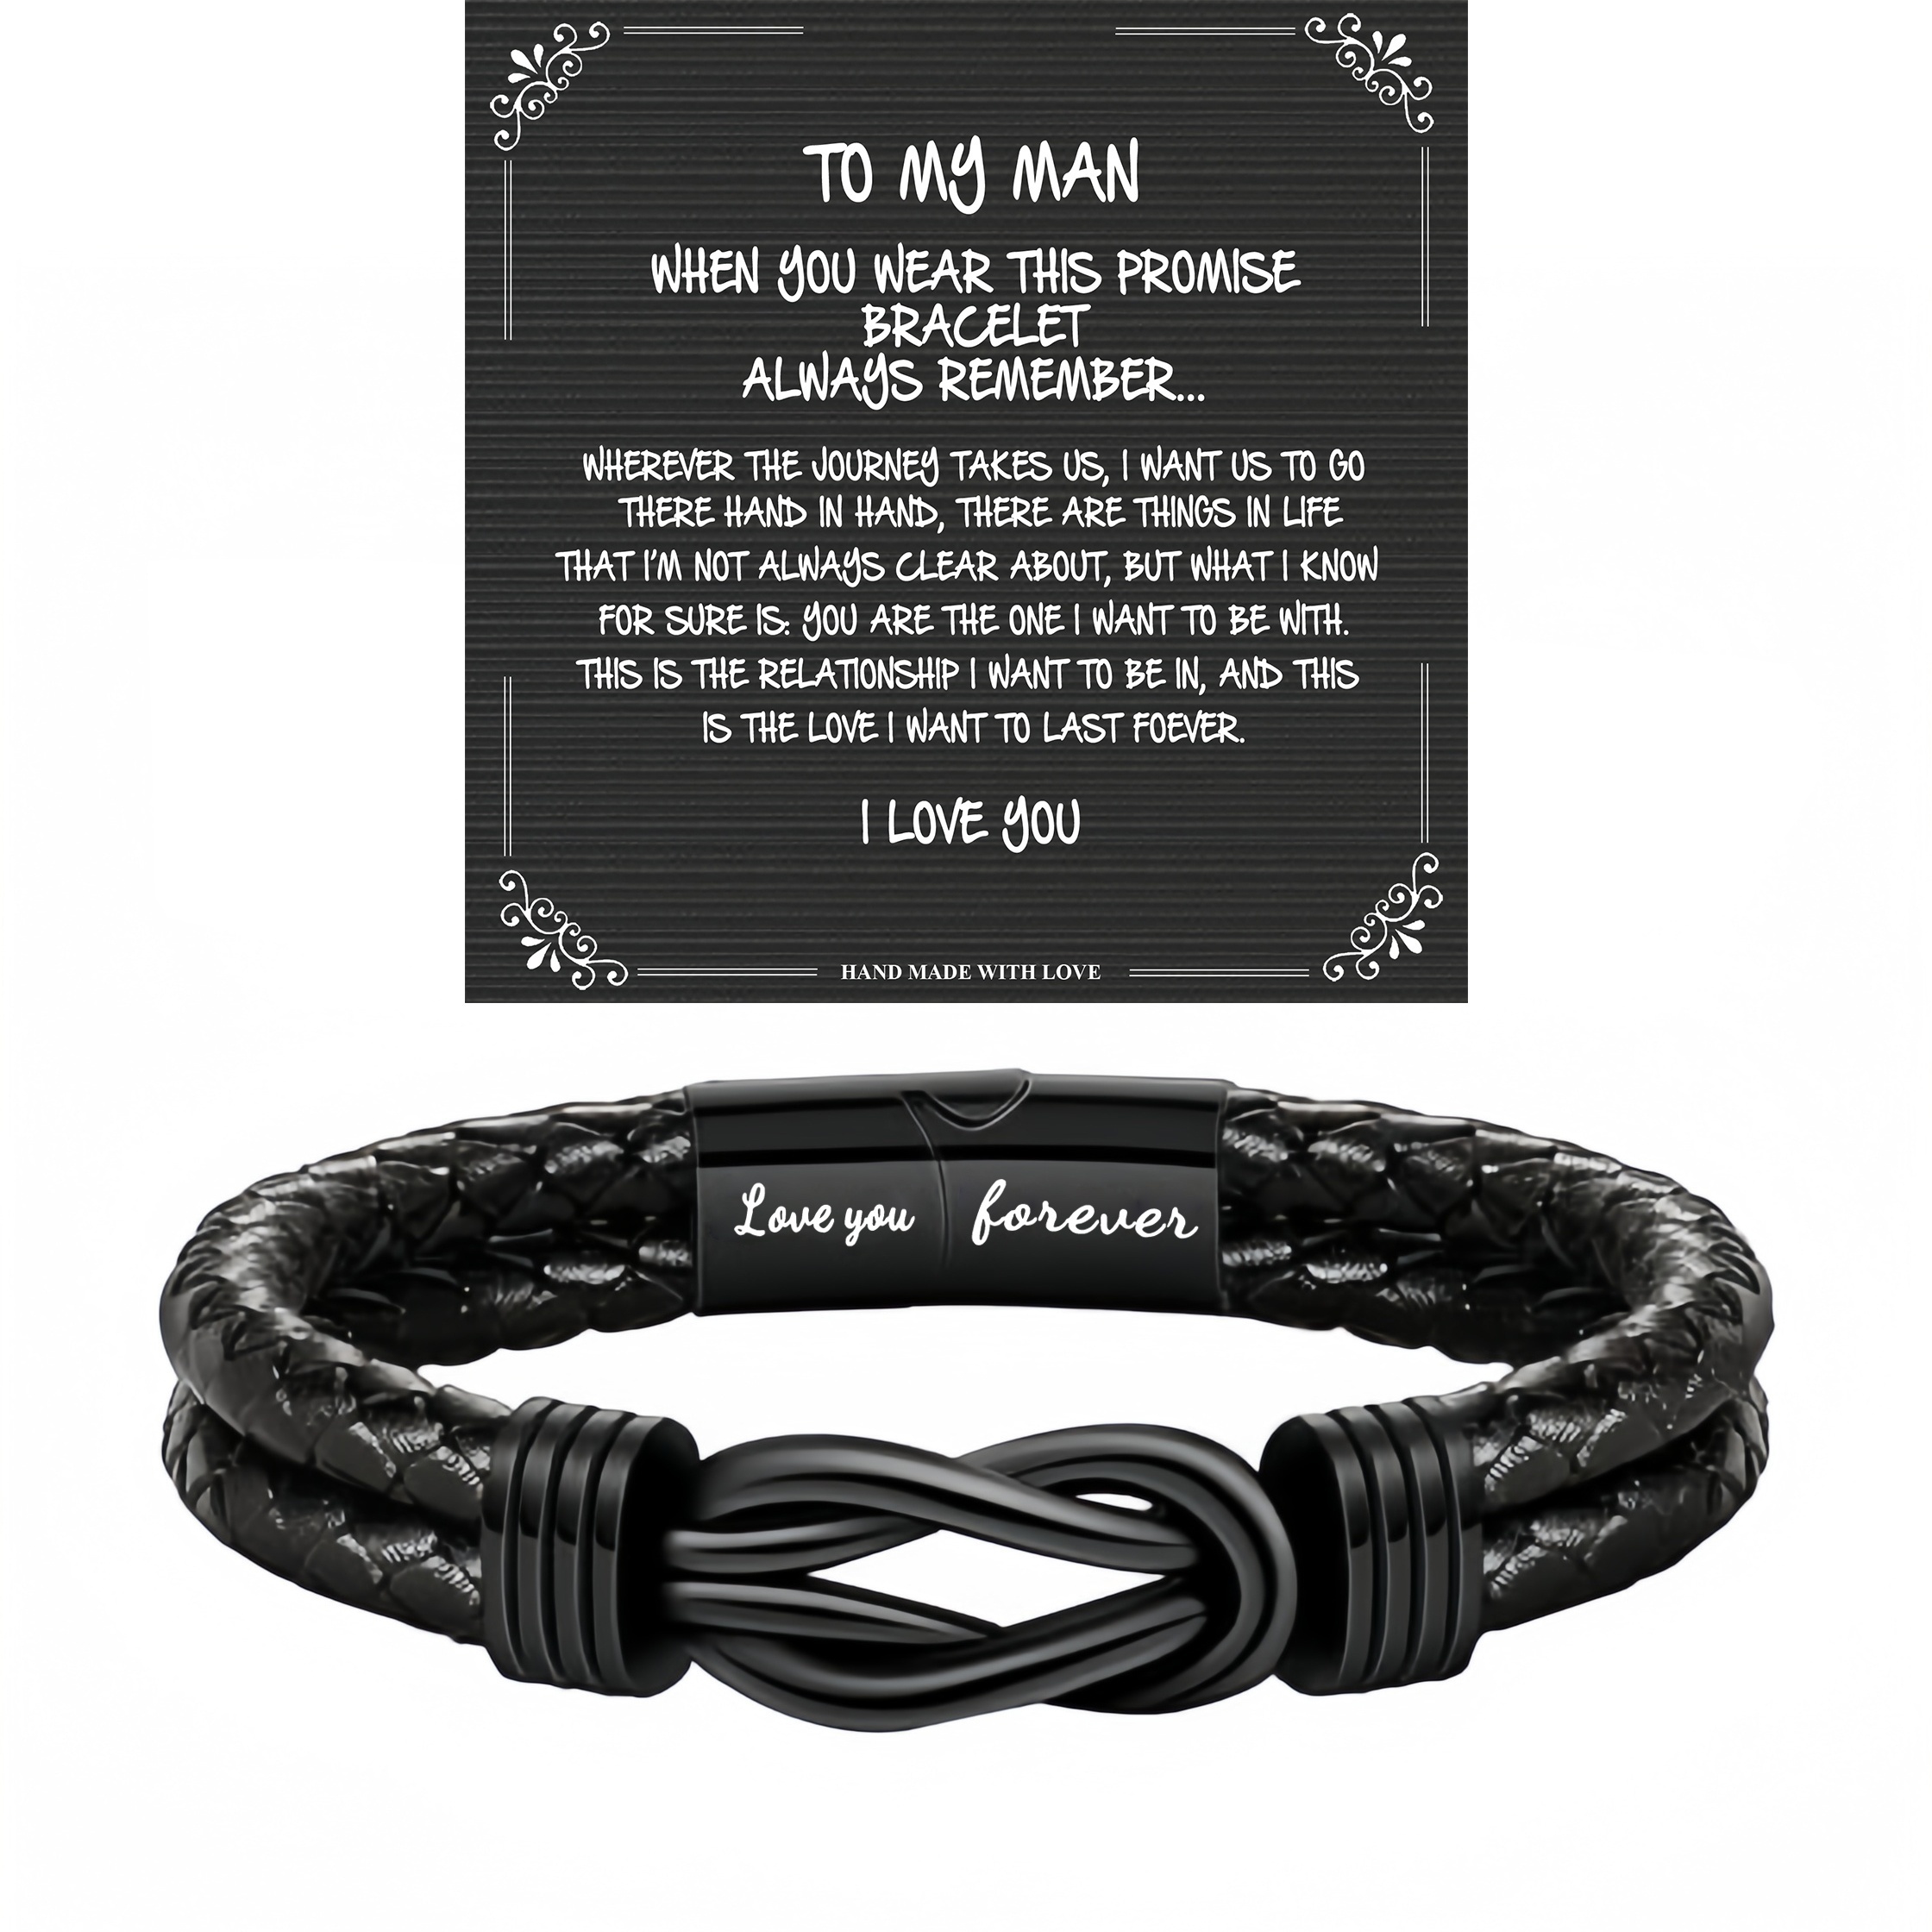 

To My Man Black Color Artificial Leather Bracelet With Blessing Card, Valentine's Day Gifts For Him, Birthday Gifts For Man, To My Man Gift Knot Bracelet Jewelry